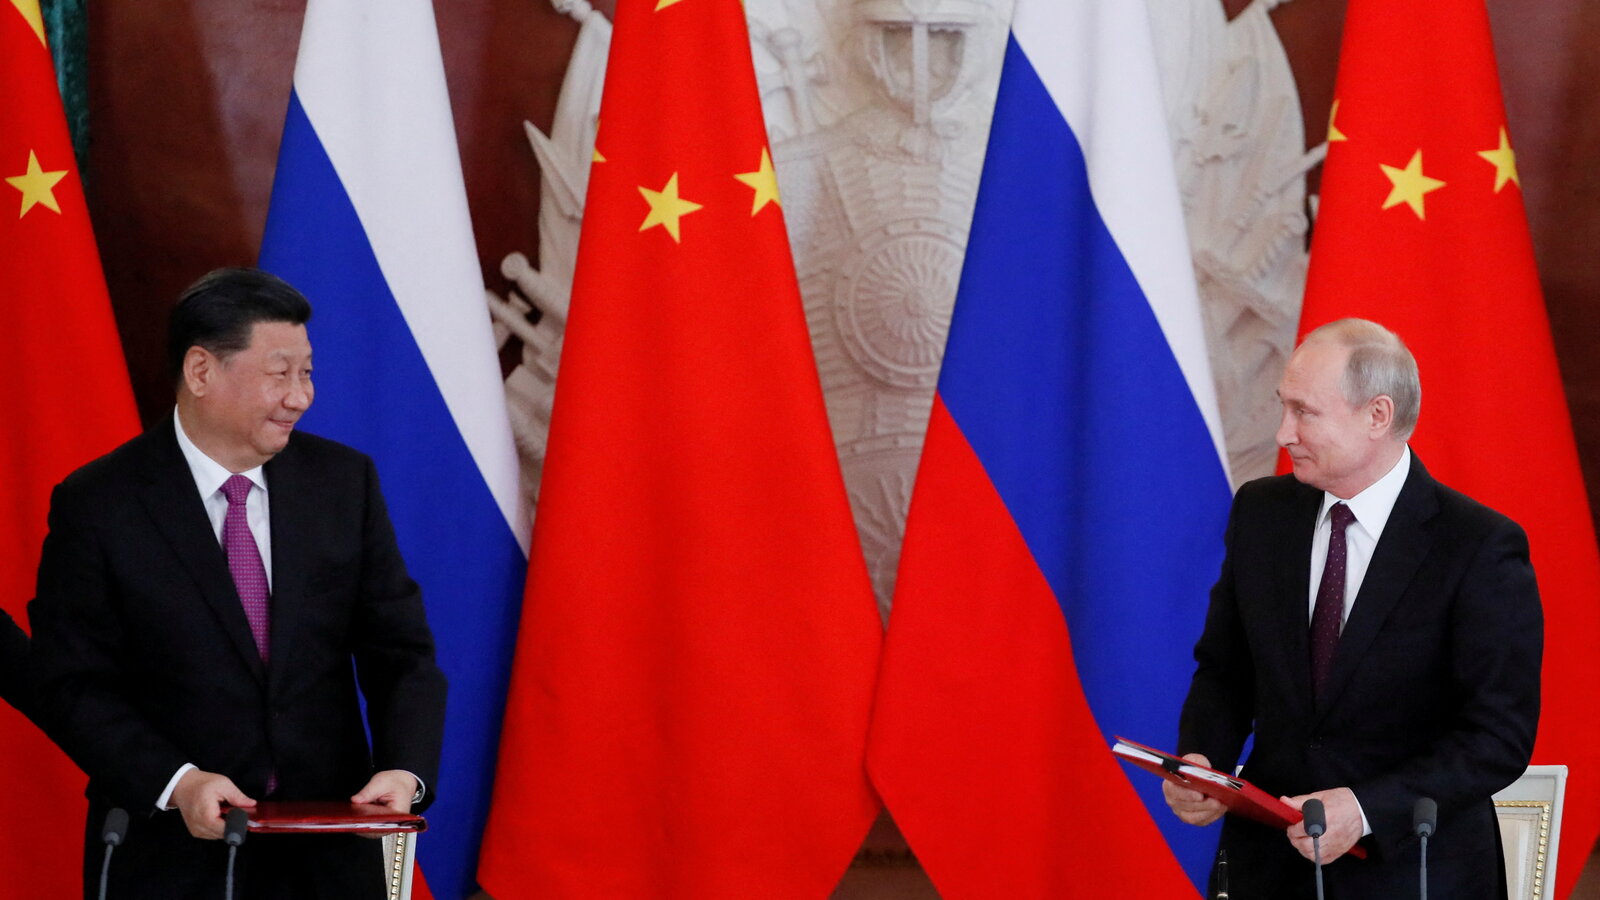 The Limits To Russia And China’s ‘No Limits’ Friendship – Analysis By Anna Kireeva